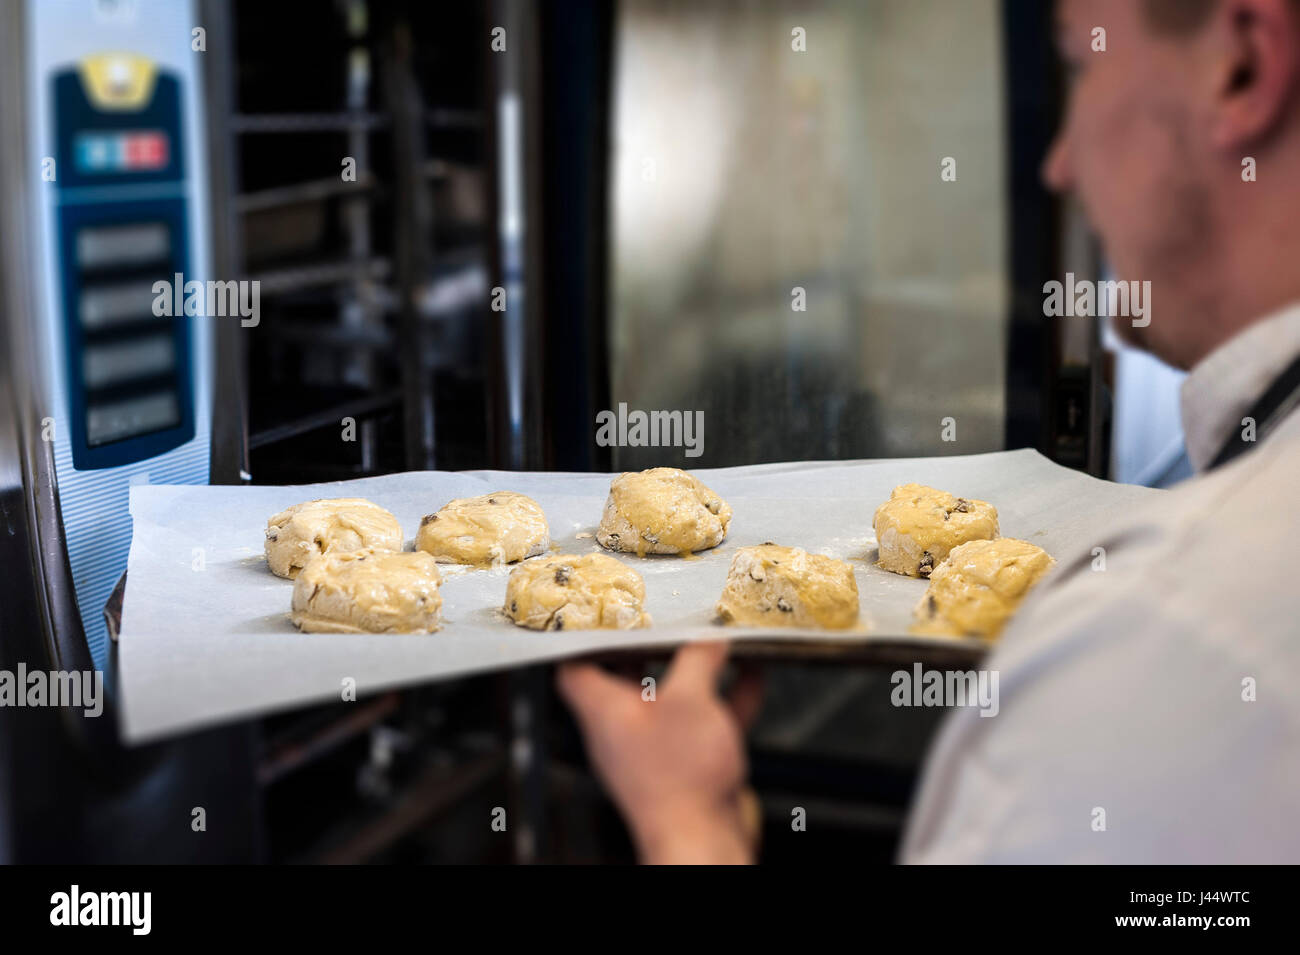 A chef puts a tray of scones into an oven Kitchen Food Cooking Baking Restaurant Food preparation Food service industry Worker Working Stock Photo